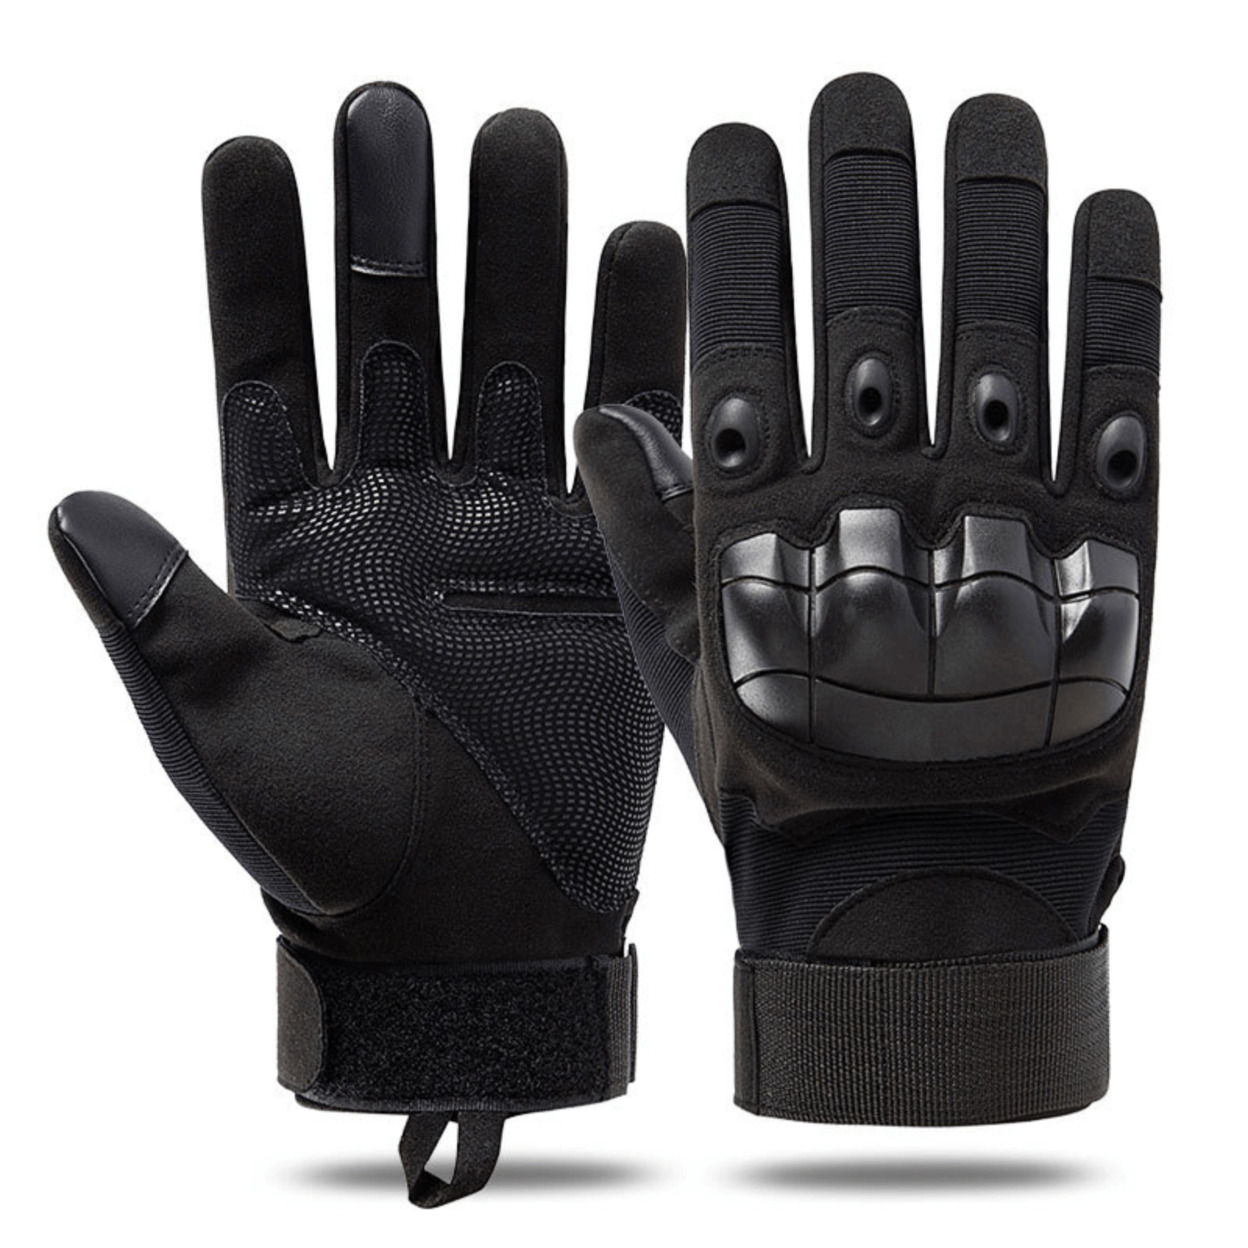 Tactical Military Airsoft Gloves For Outdoor Sports, Paintball, And Motorcycling With Touchscreen Fingertip Capability - Black, Medium